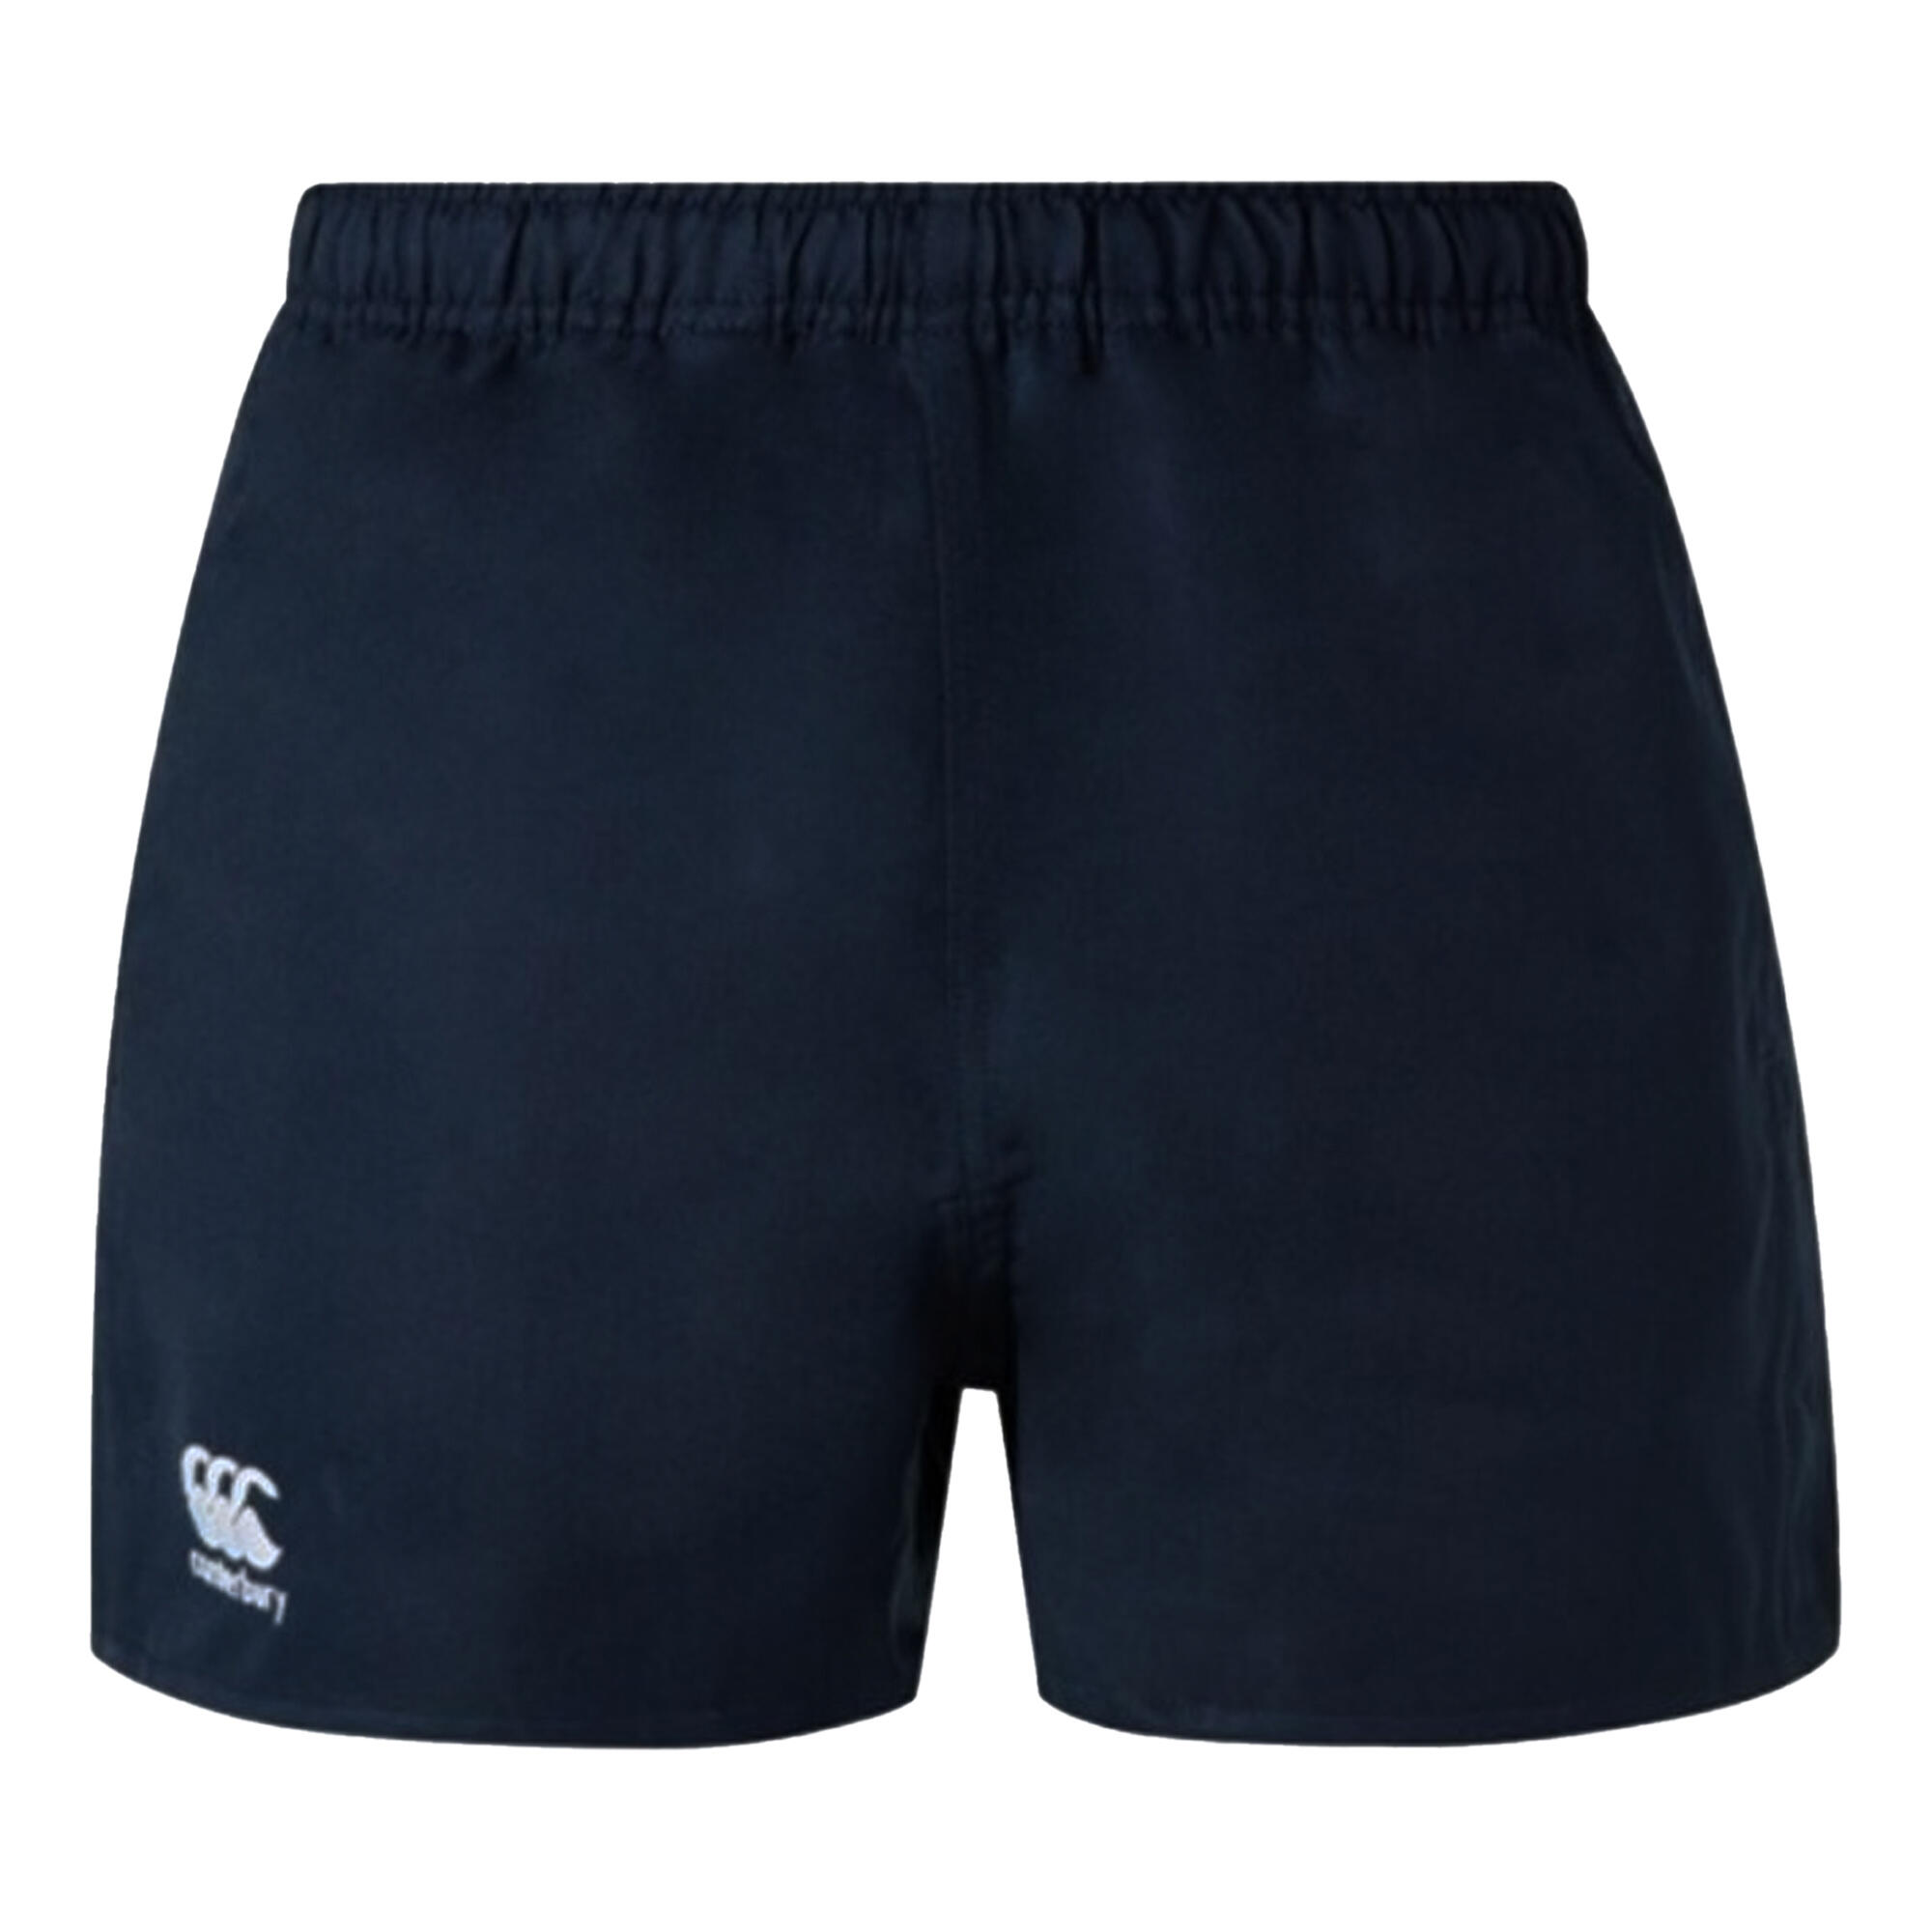 CANTERBURY Childrens/Kids Professional Polyester Shorts (Navy)